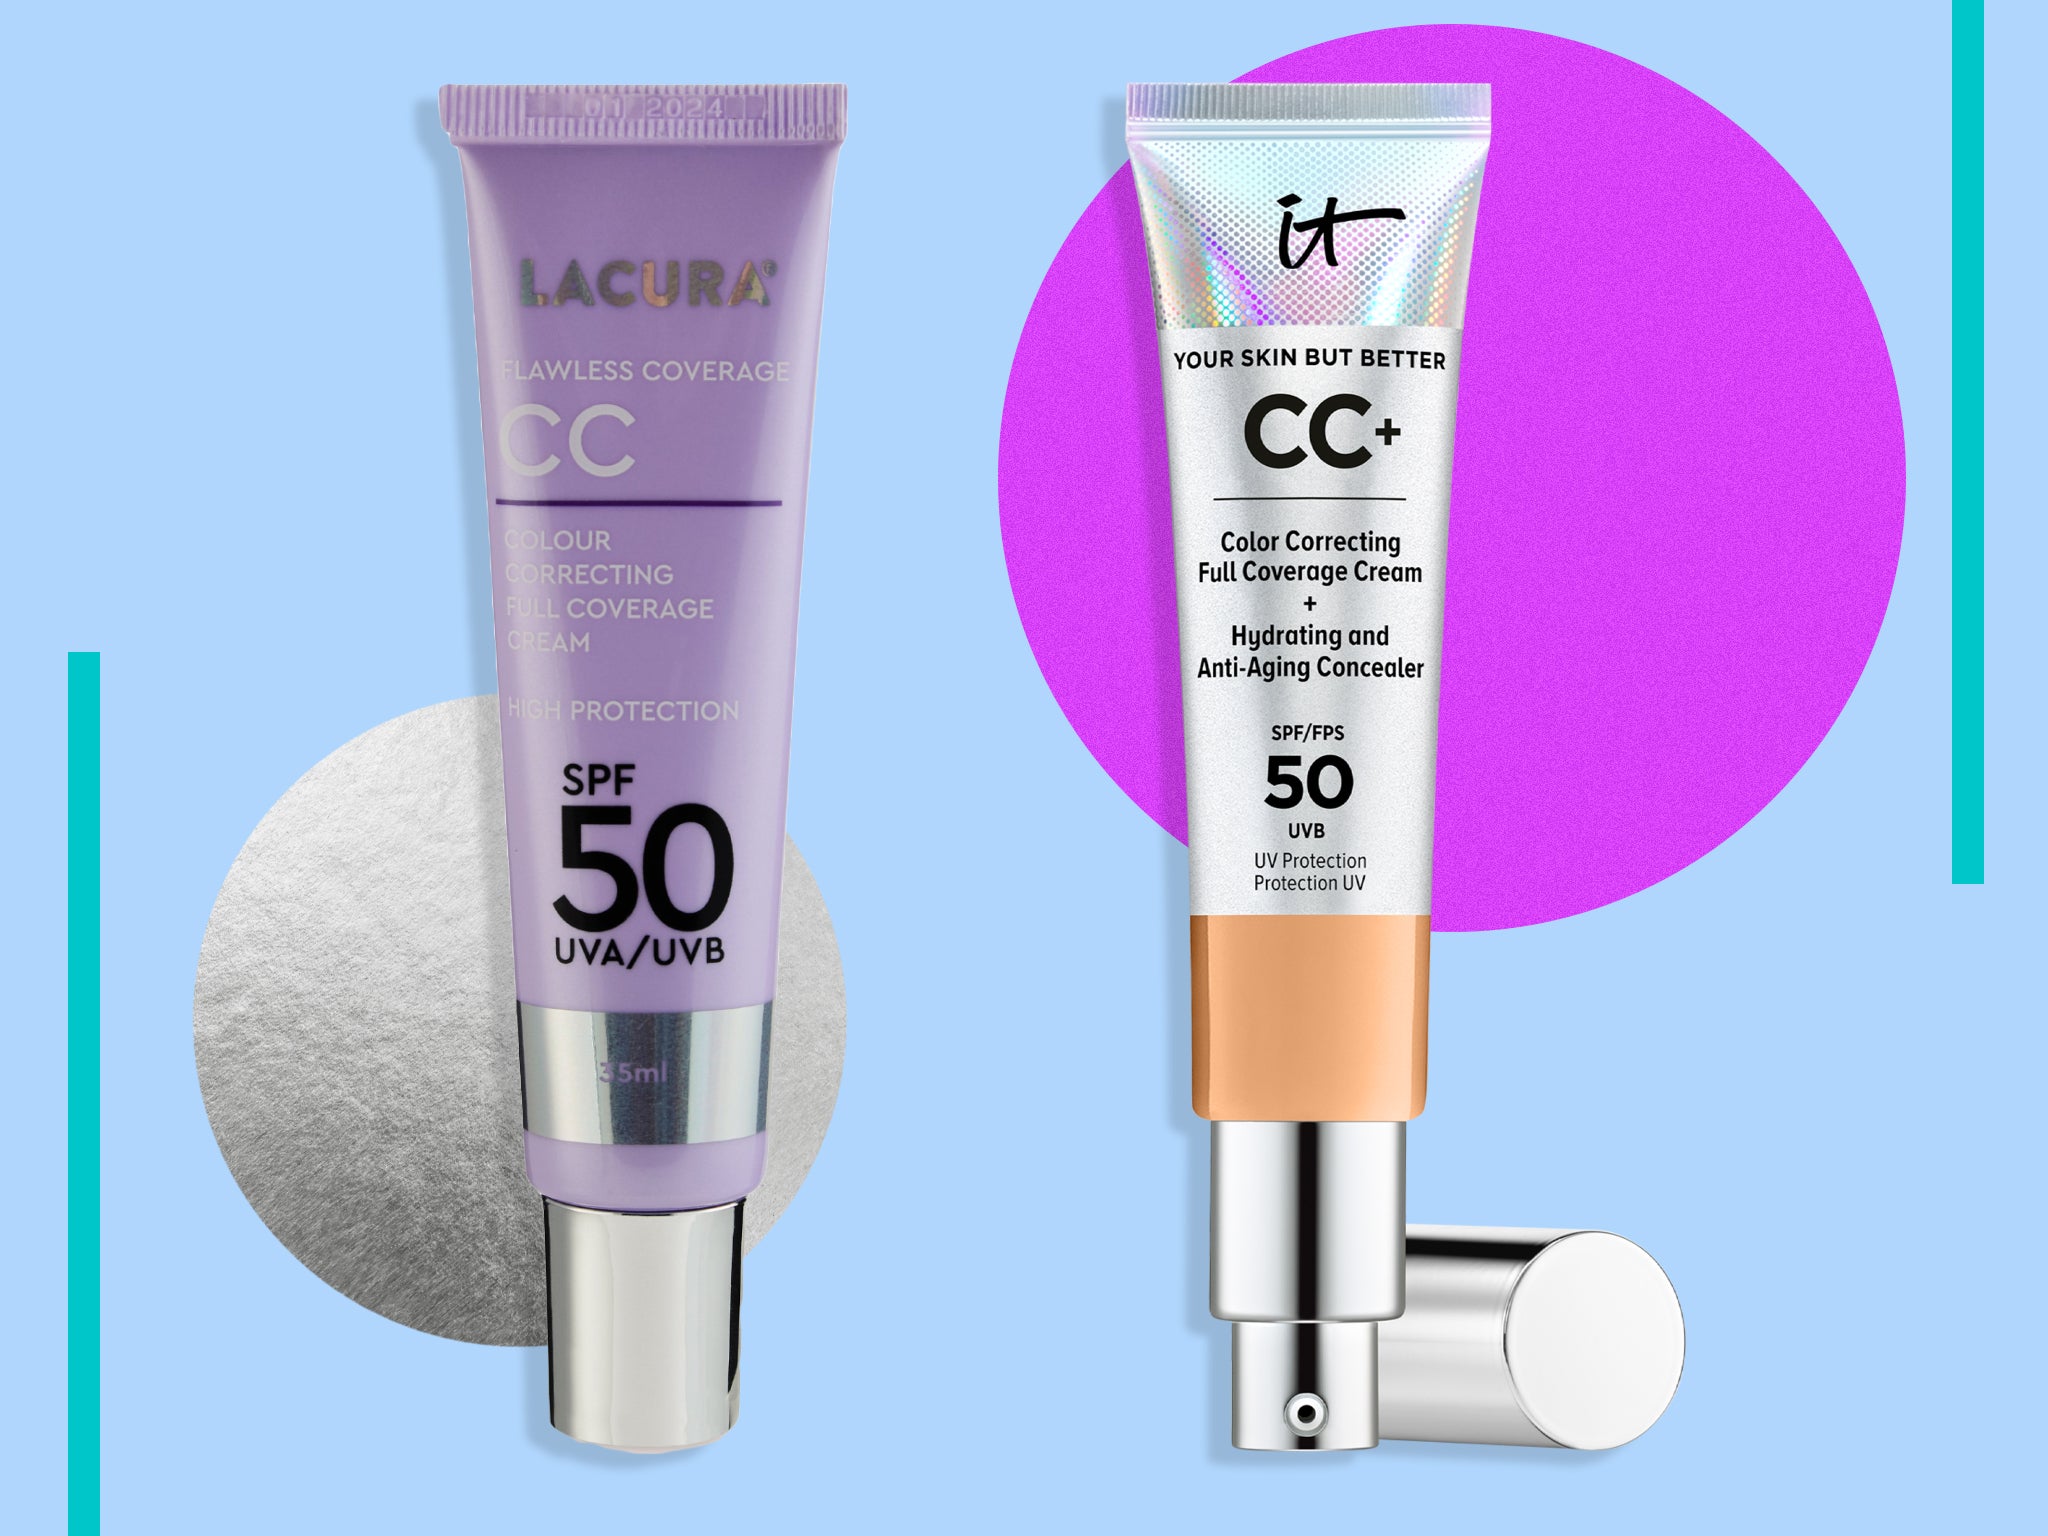 We added both products to our regular beauty routine for a week